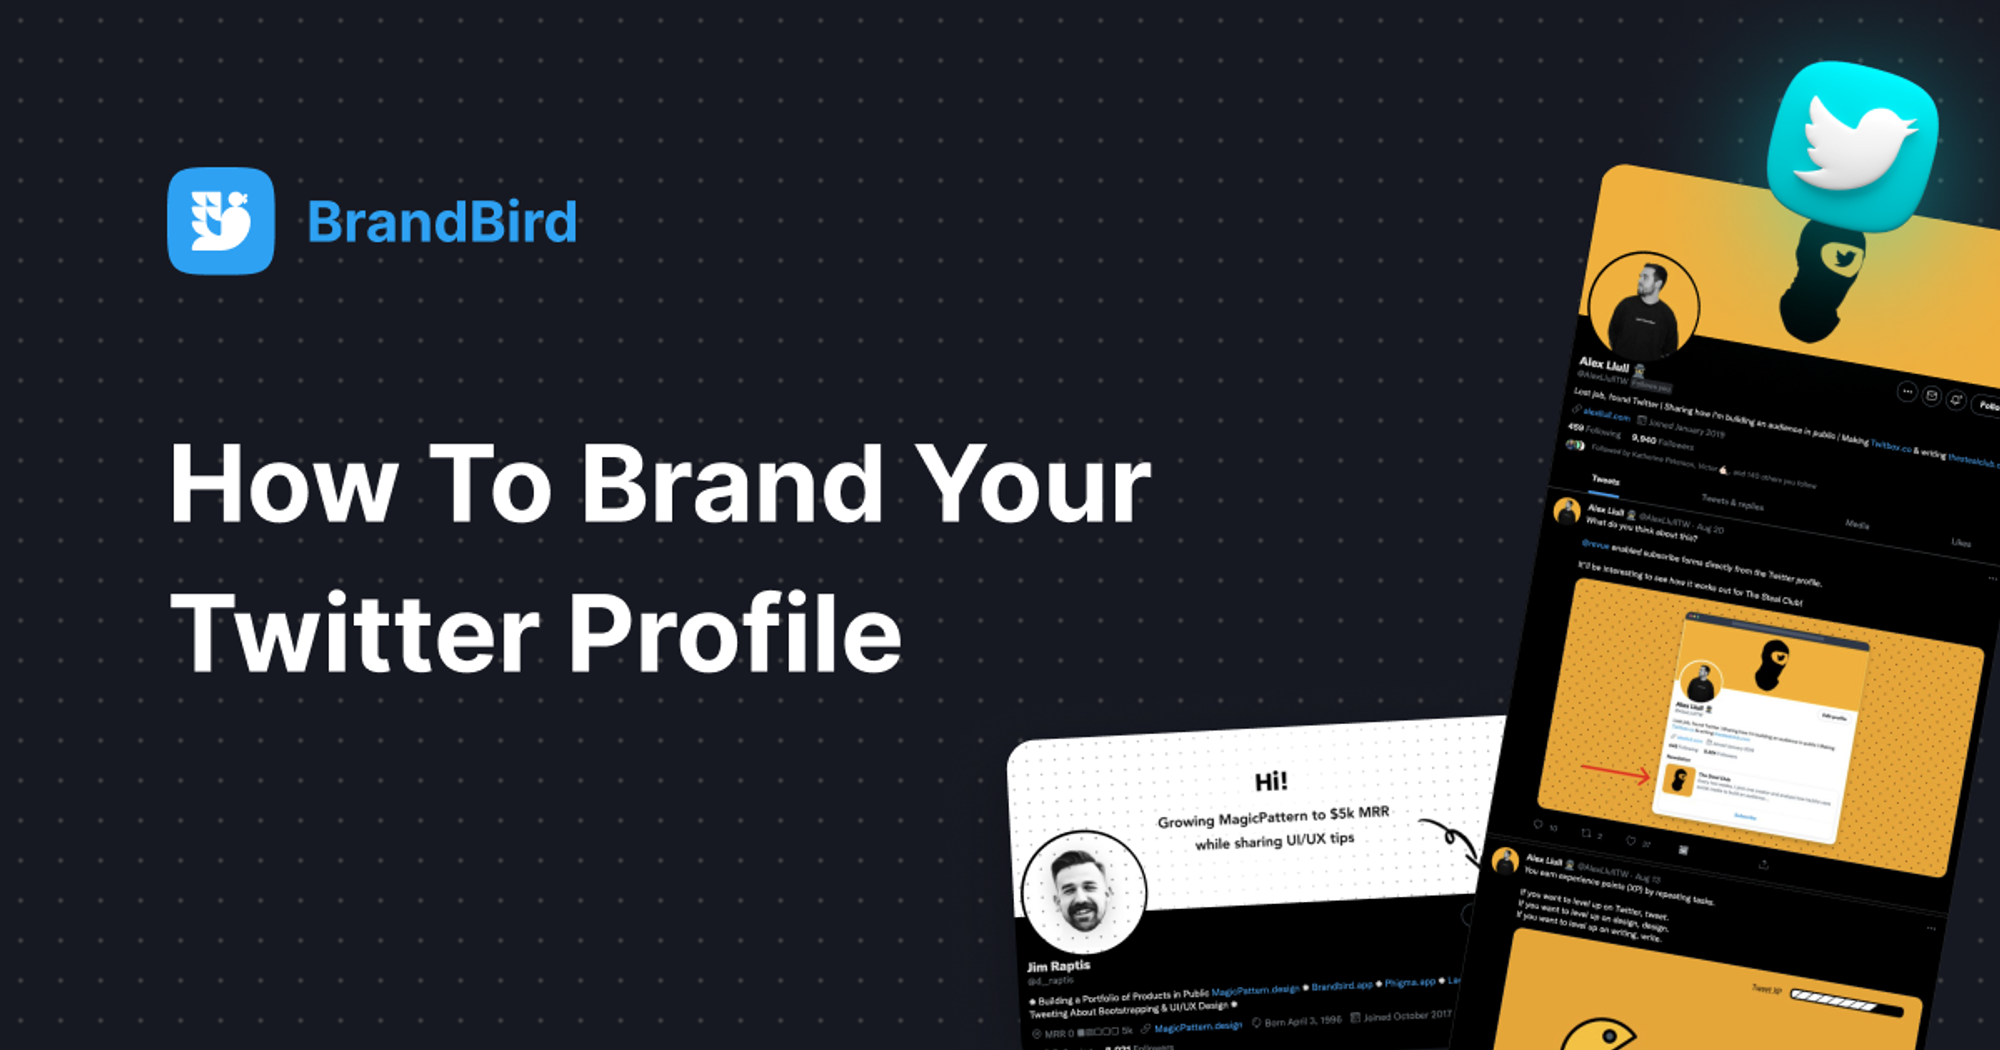 Brand your Twitter profile uniquely